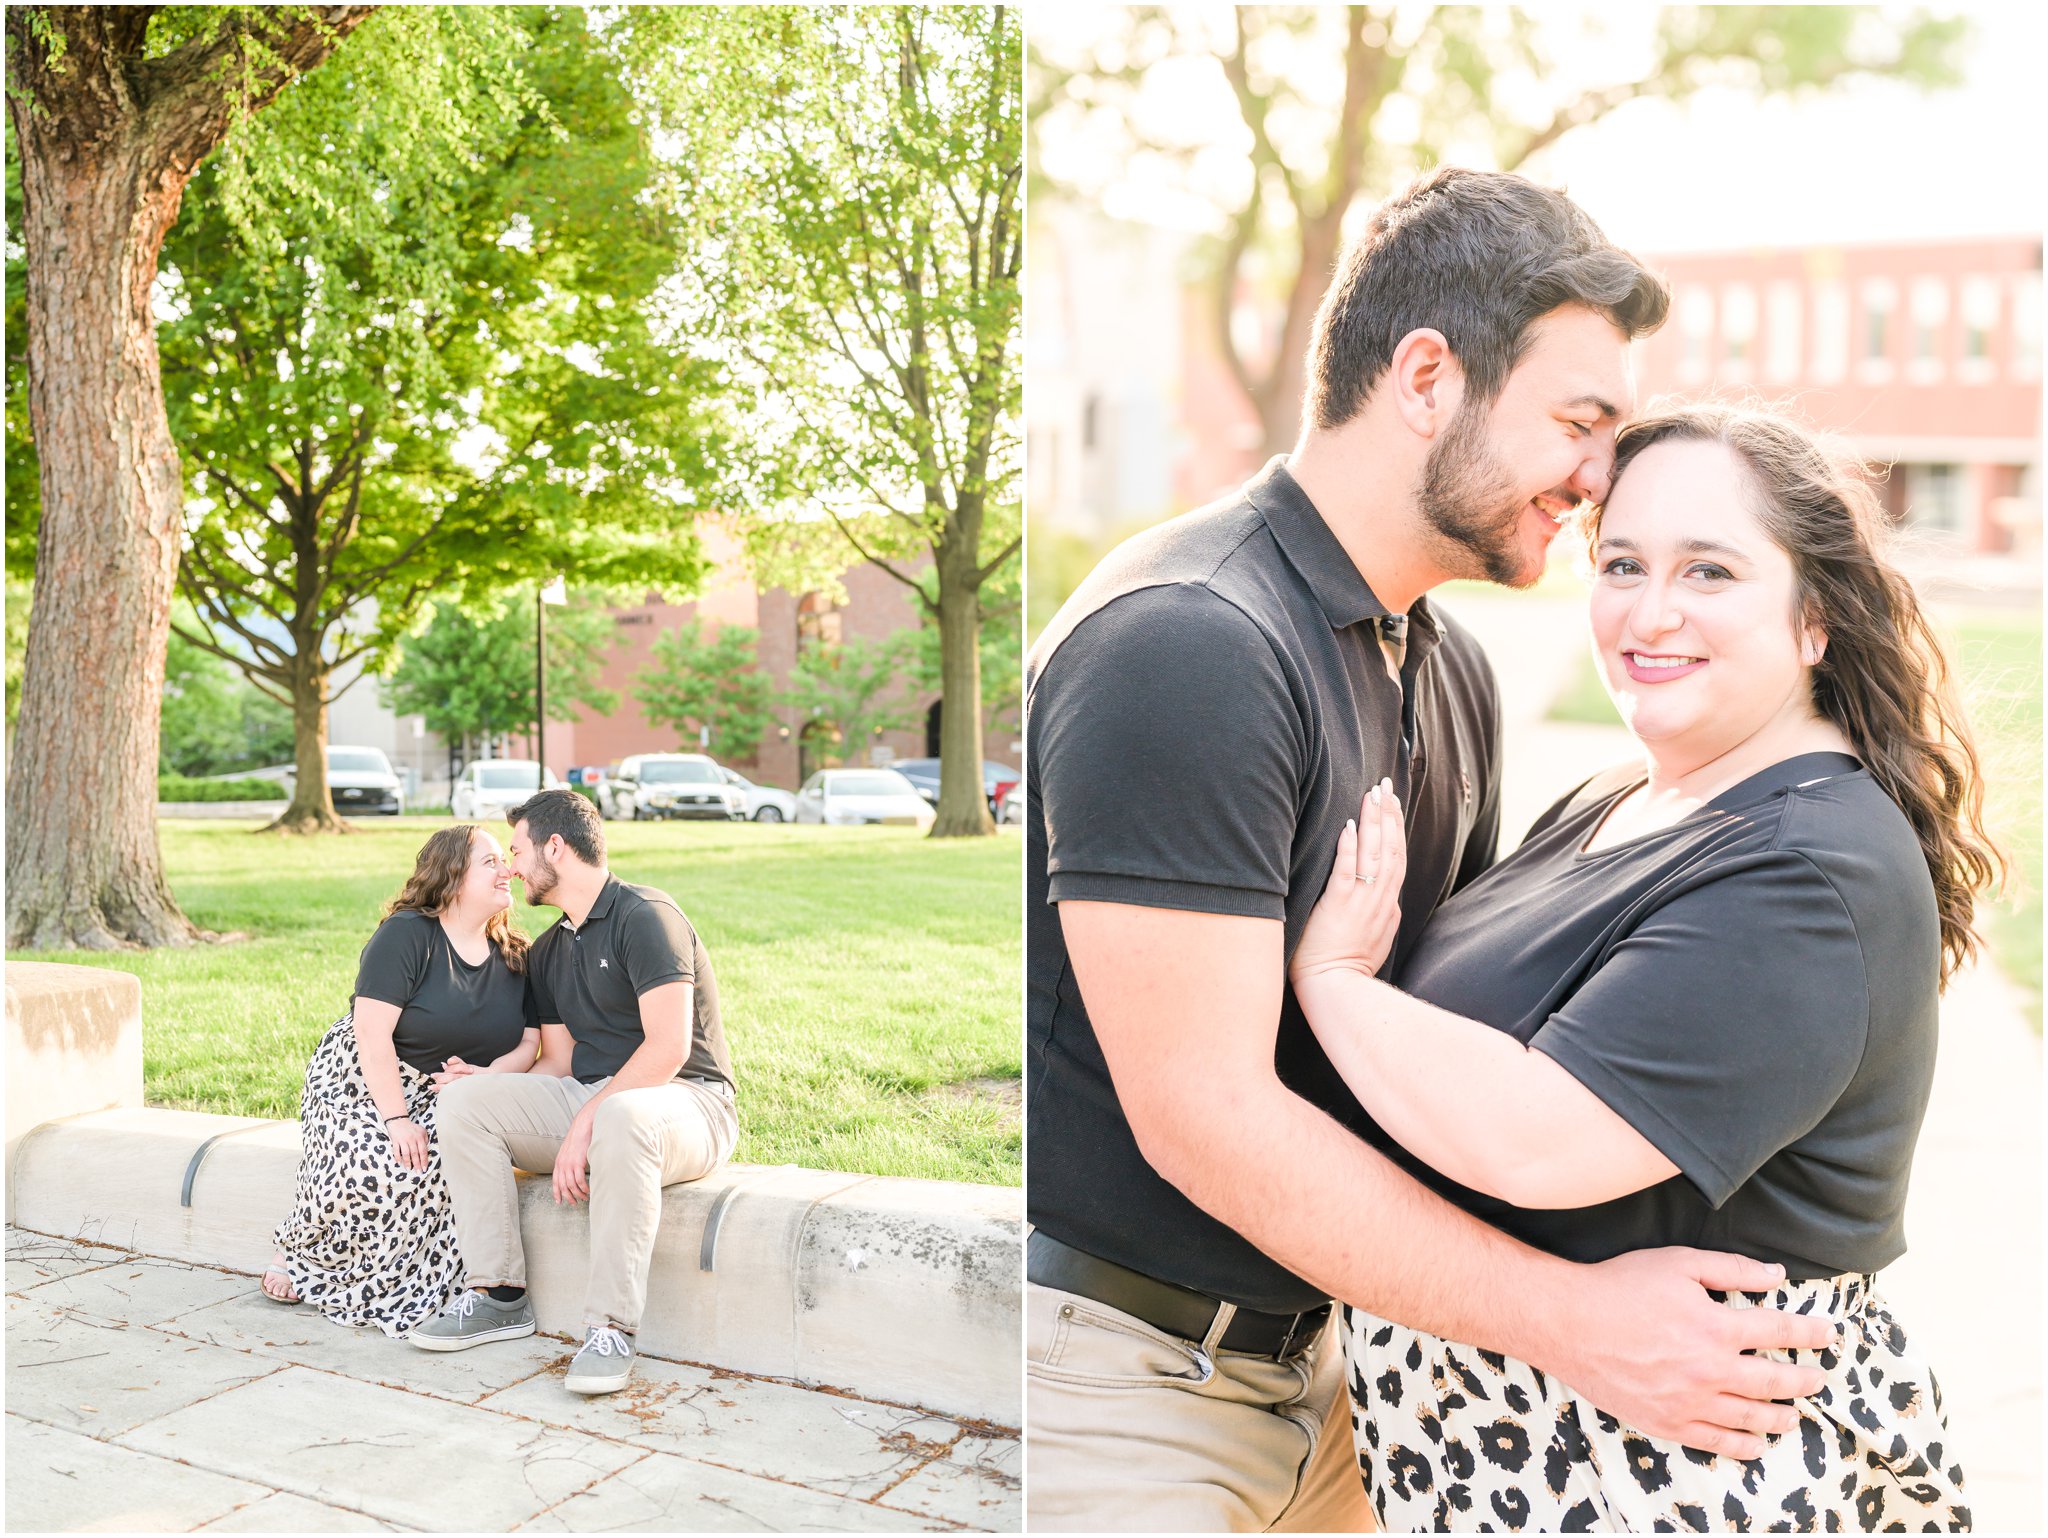 Couple nuzzling Downtown Franklin, Indiana engagement session